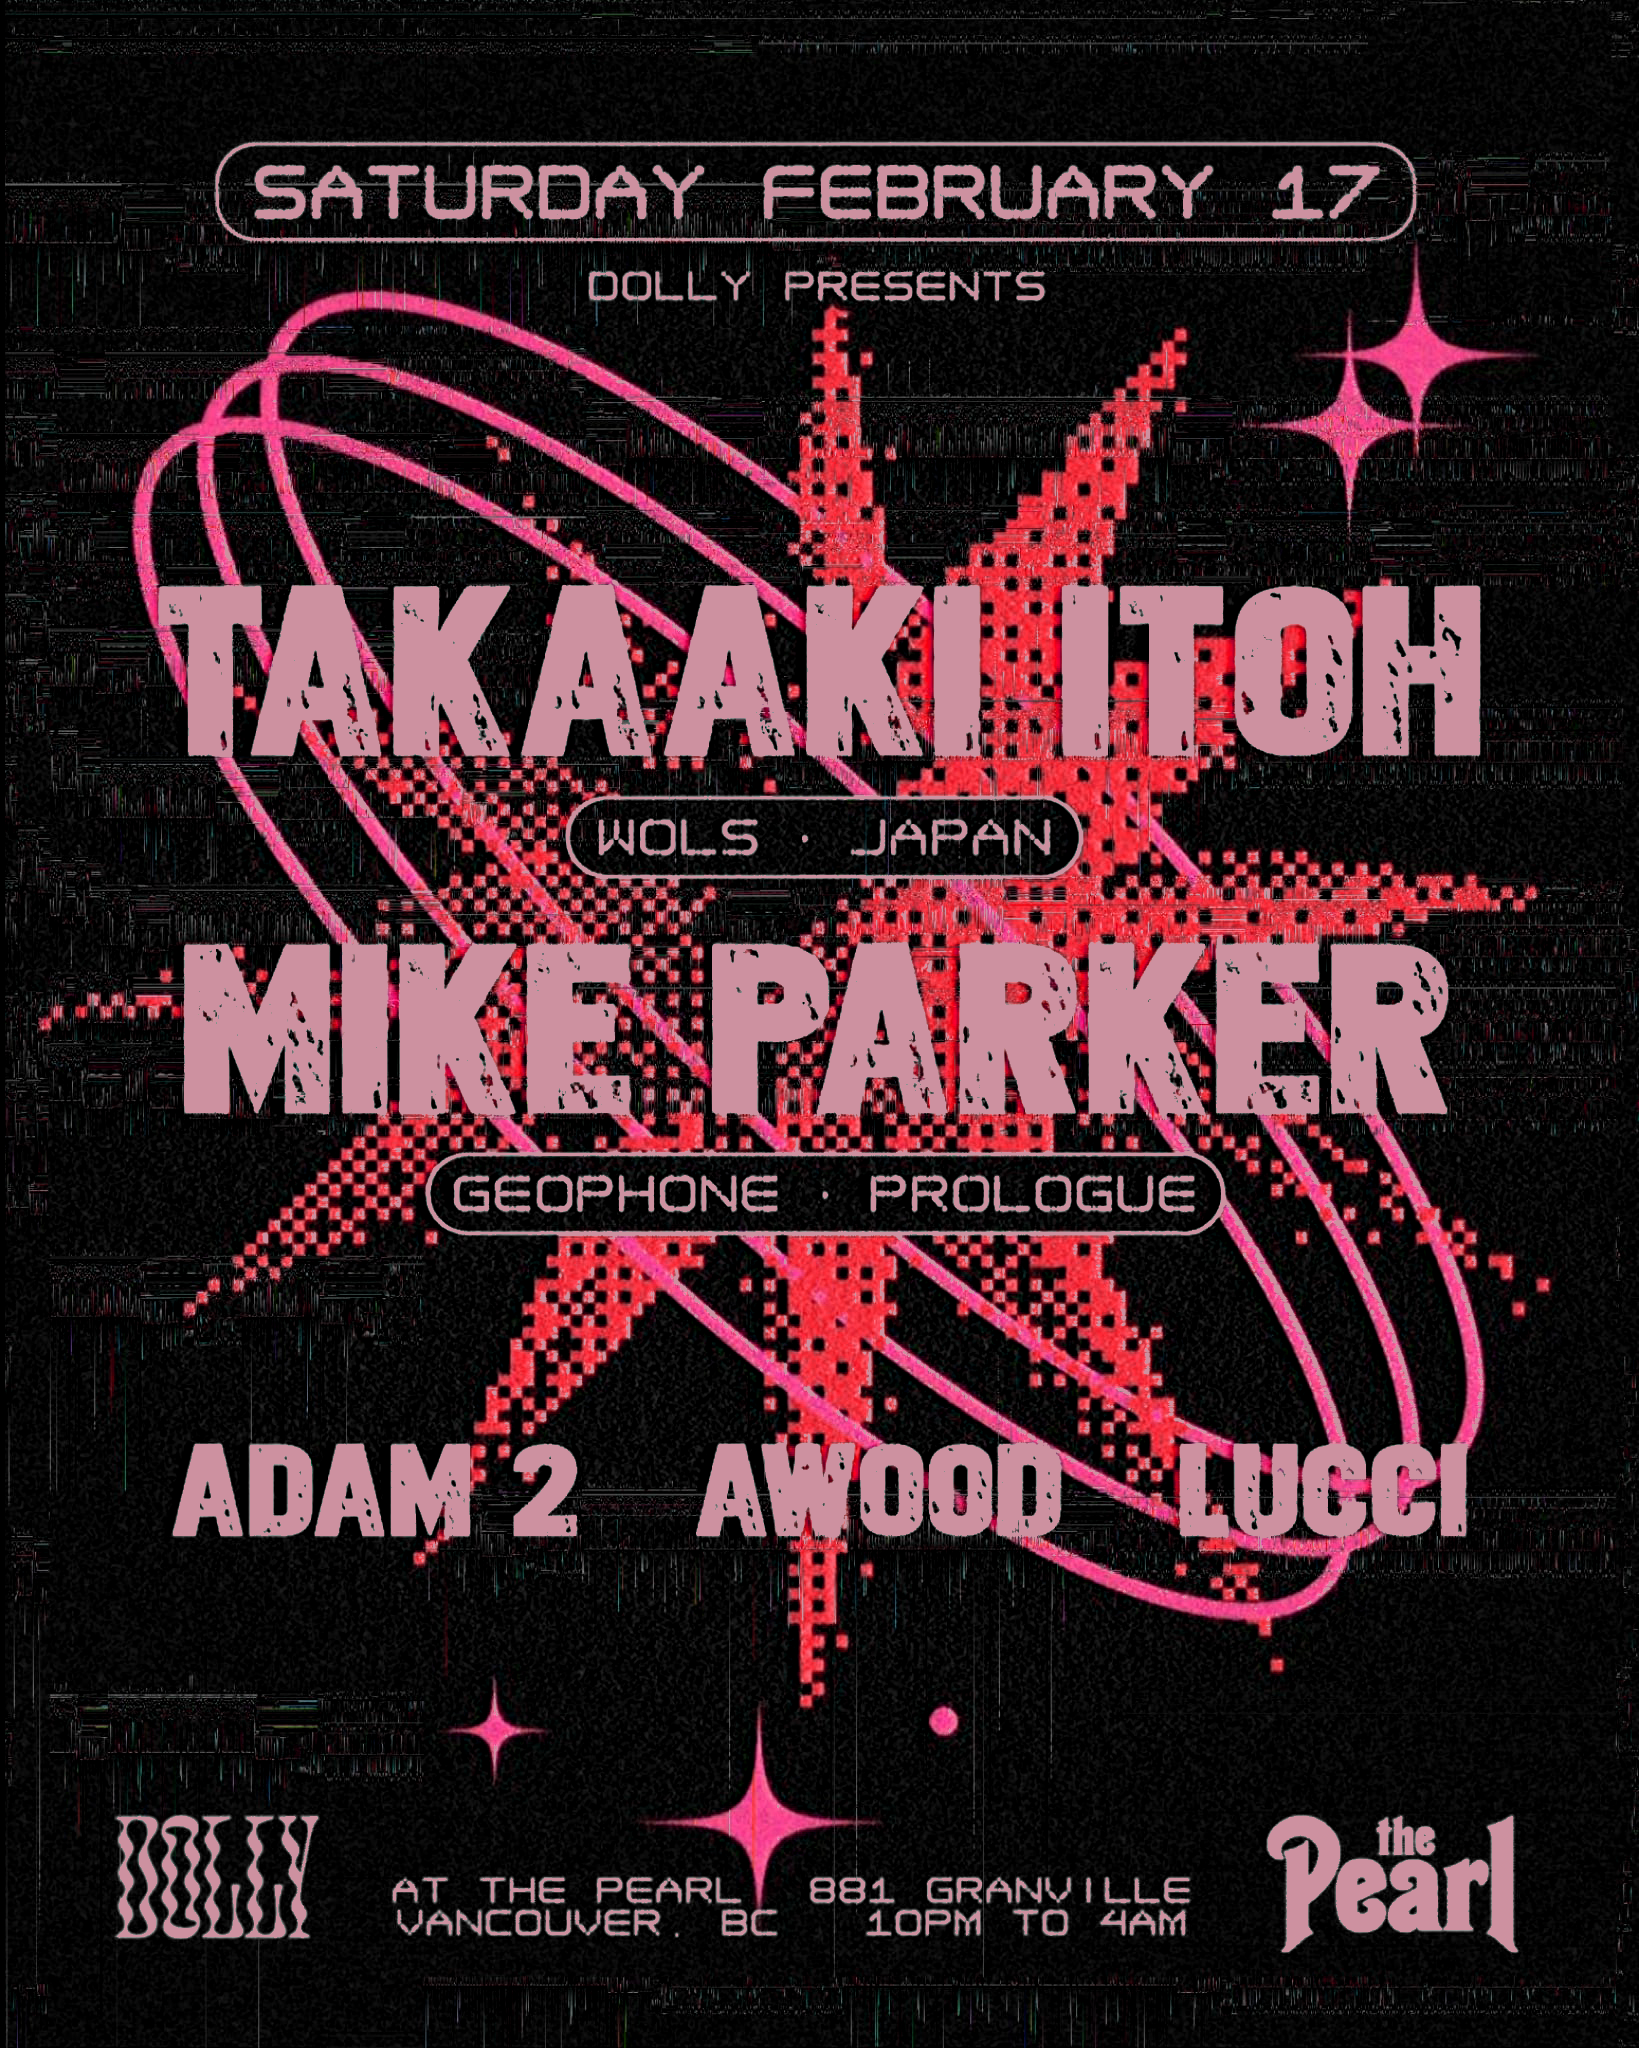 DOLLY presents: Takaaki Itoh (Wols, Japan) + Mike Parker (Geophone, Prologue) - フライヤー表